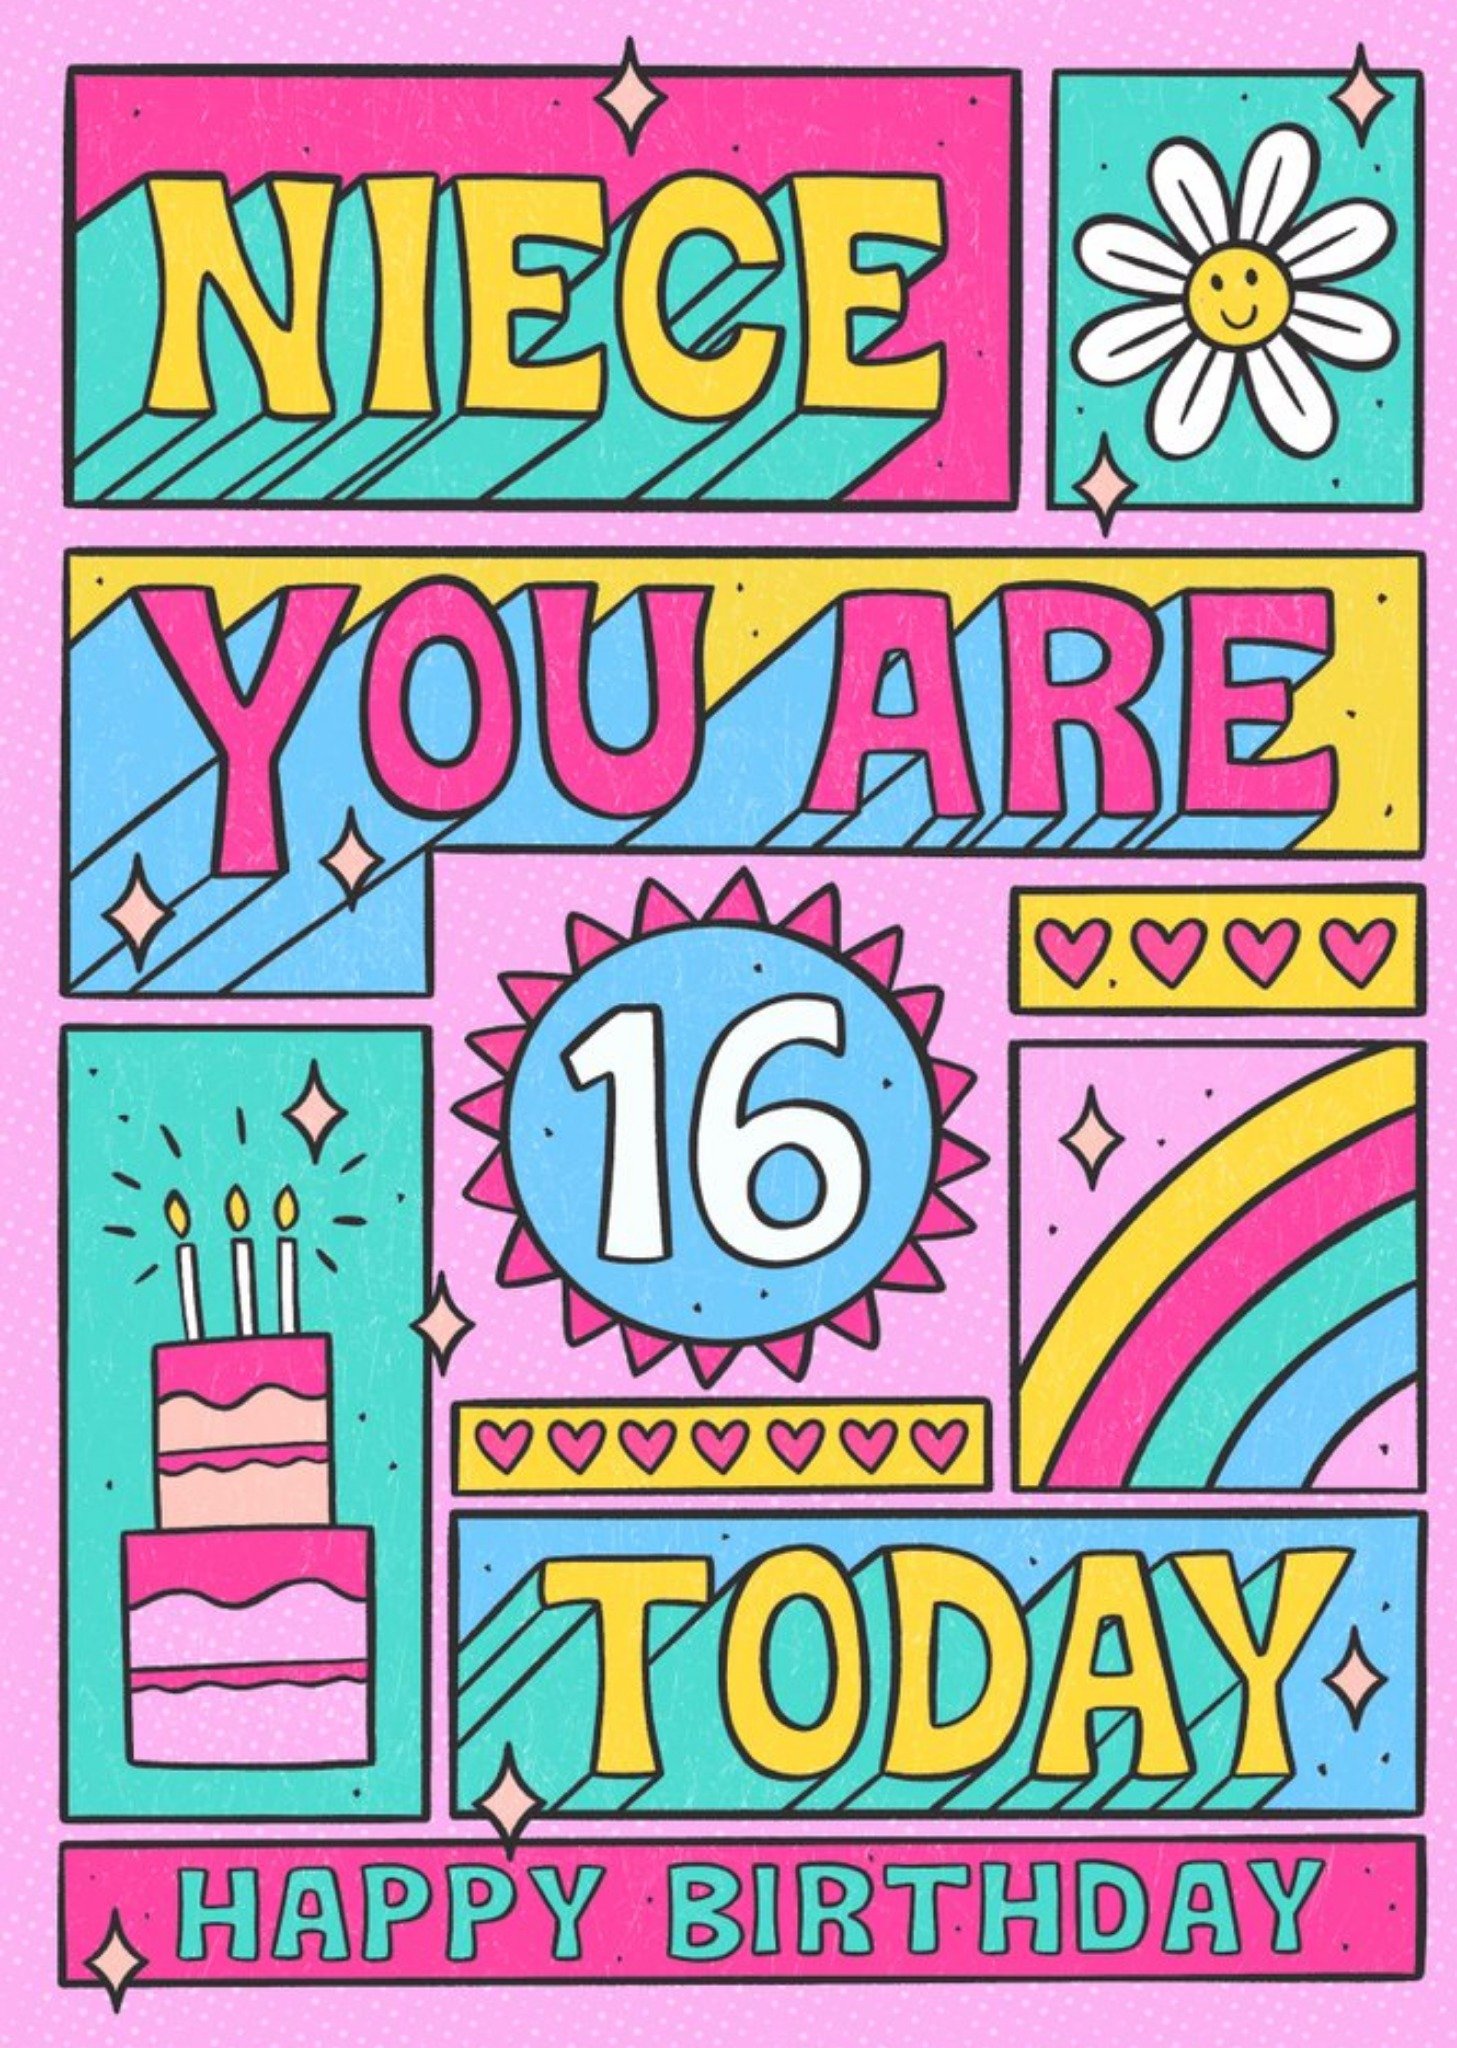 Moonpig Fun Illustration Typographic Happy Birthday Niece You Are 16 Today Birthday Card, Large